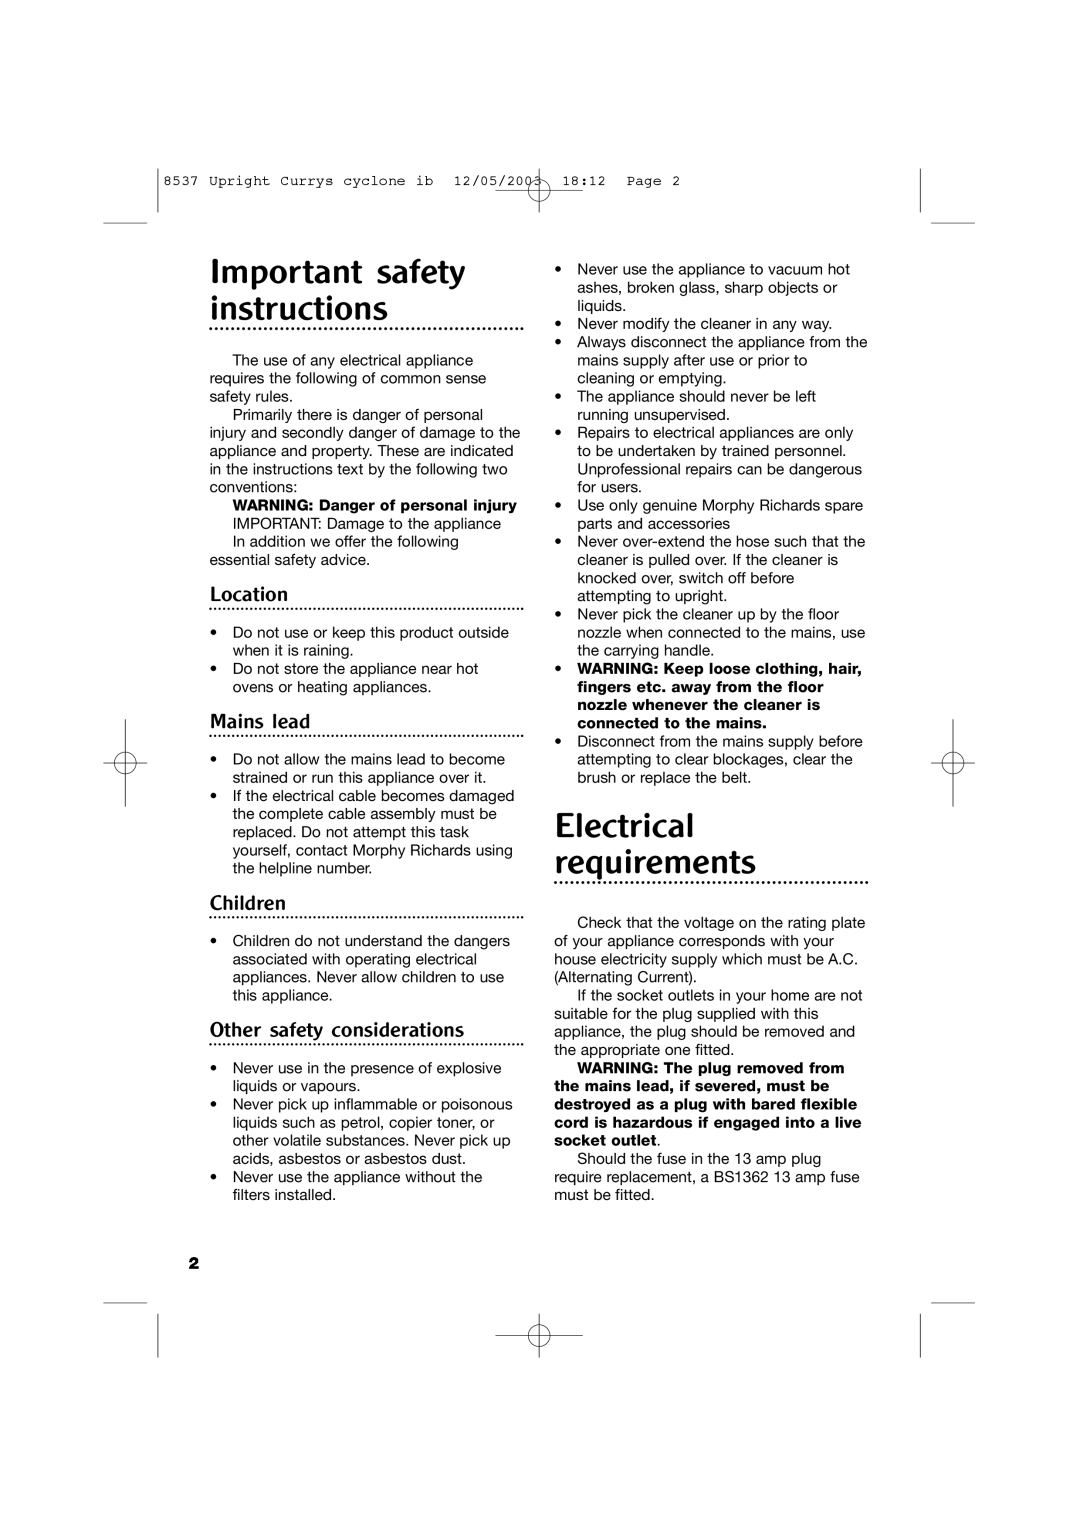 Morphy Richards 73313 manual Important safety instructions, Electrical requirements, Location, Mains lead, Children 